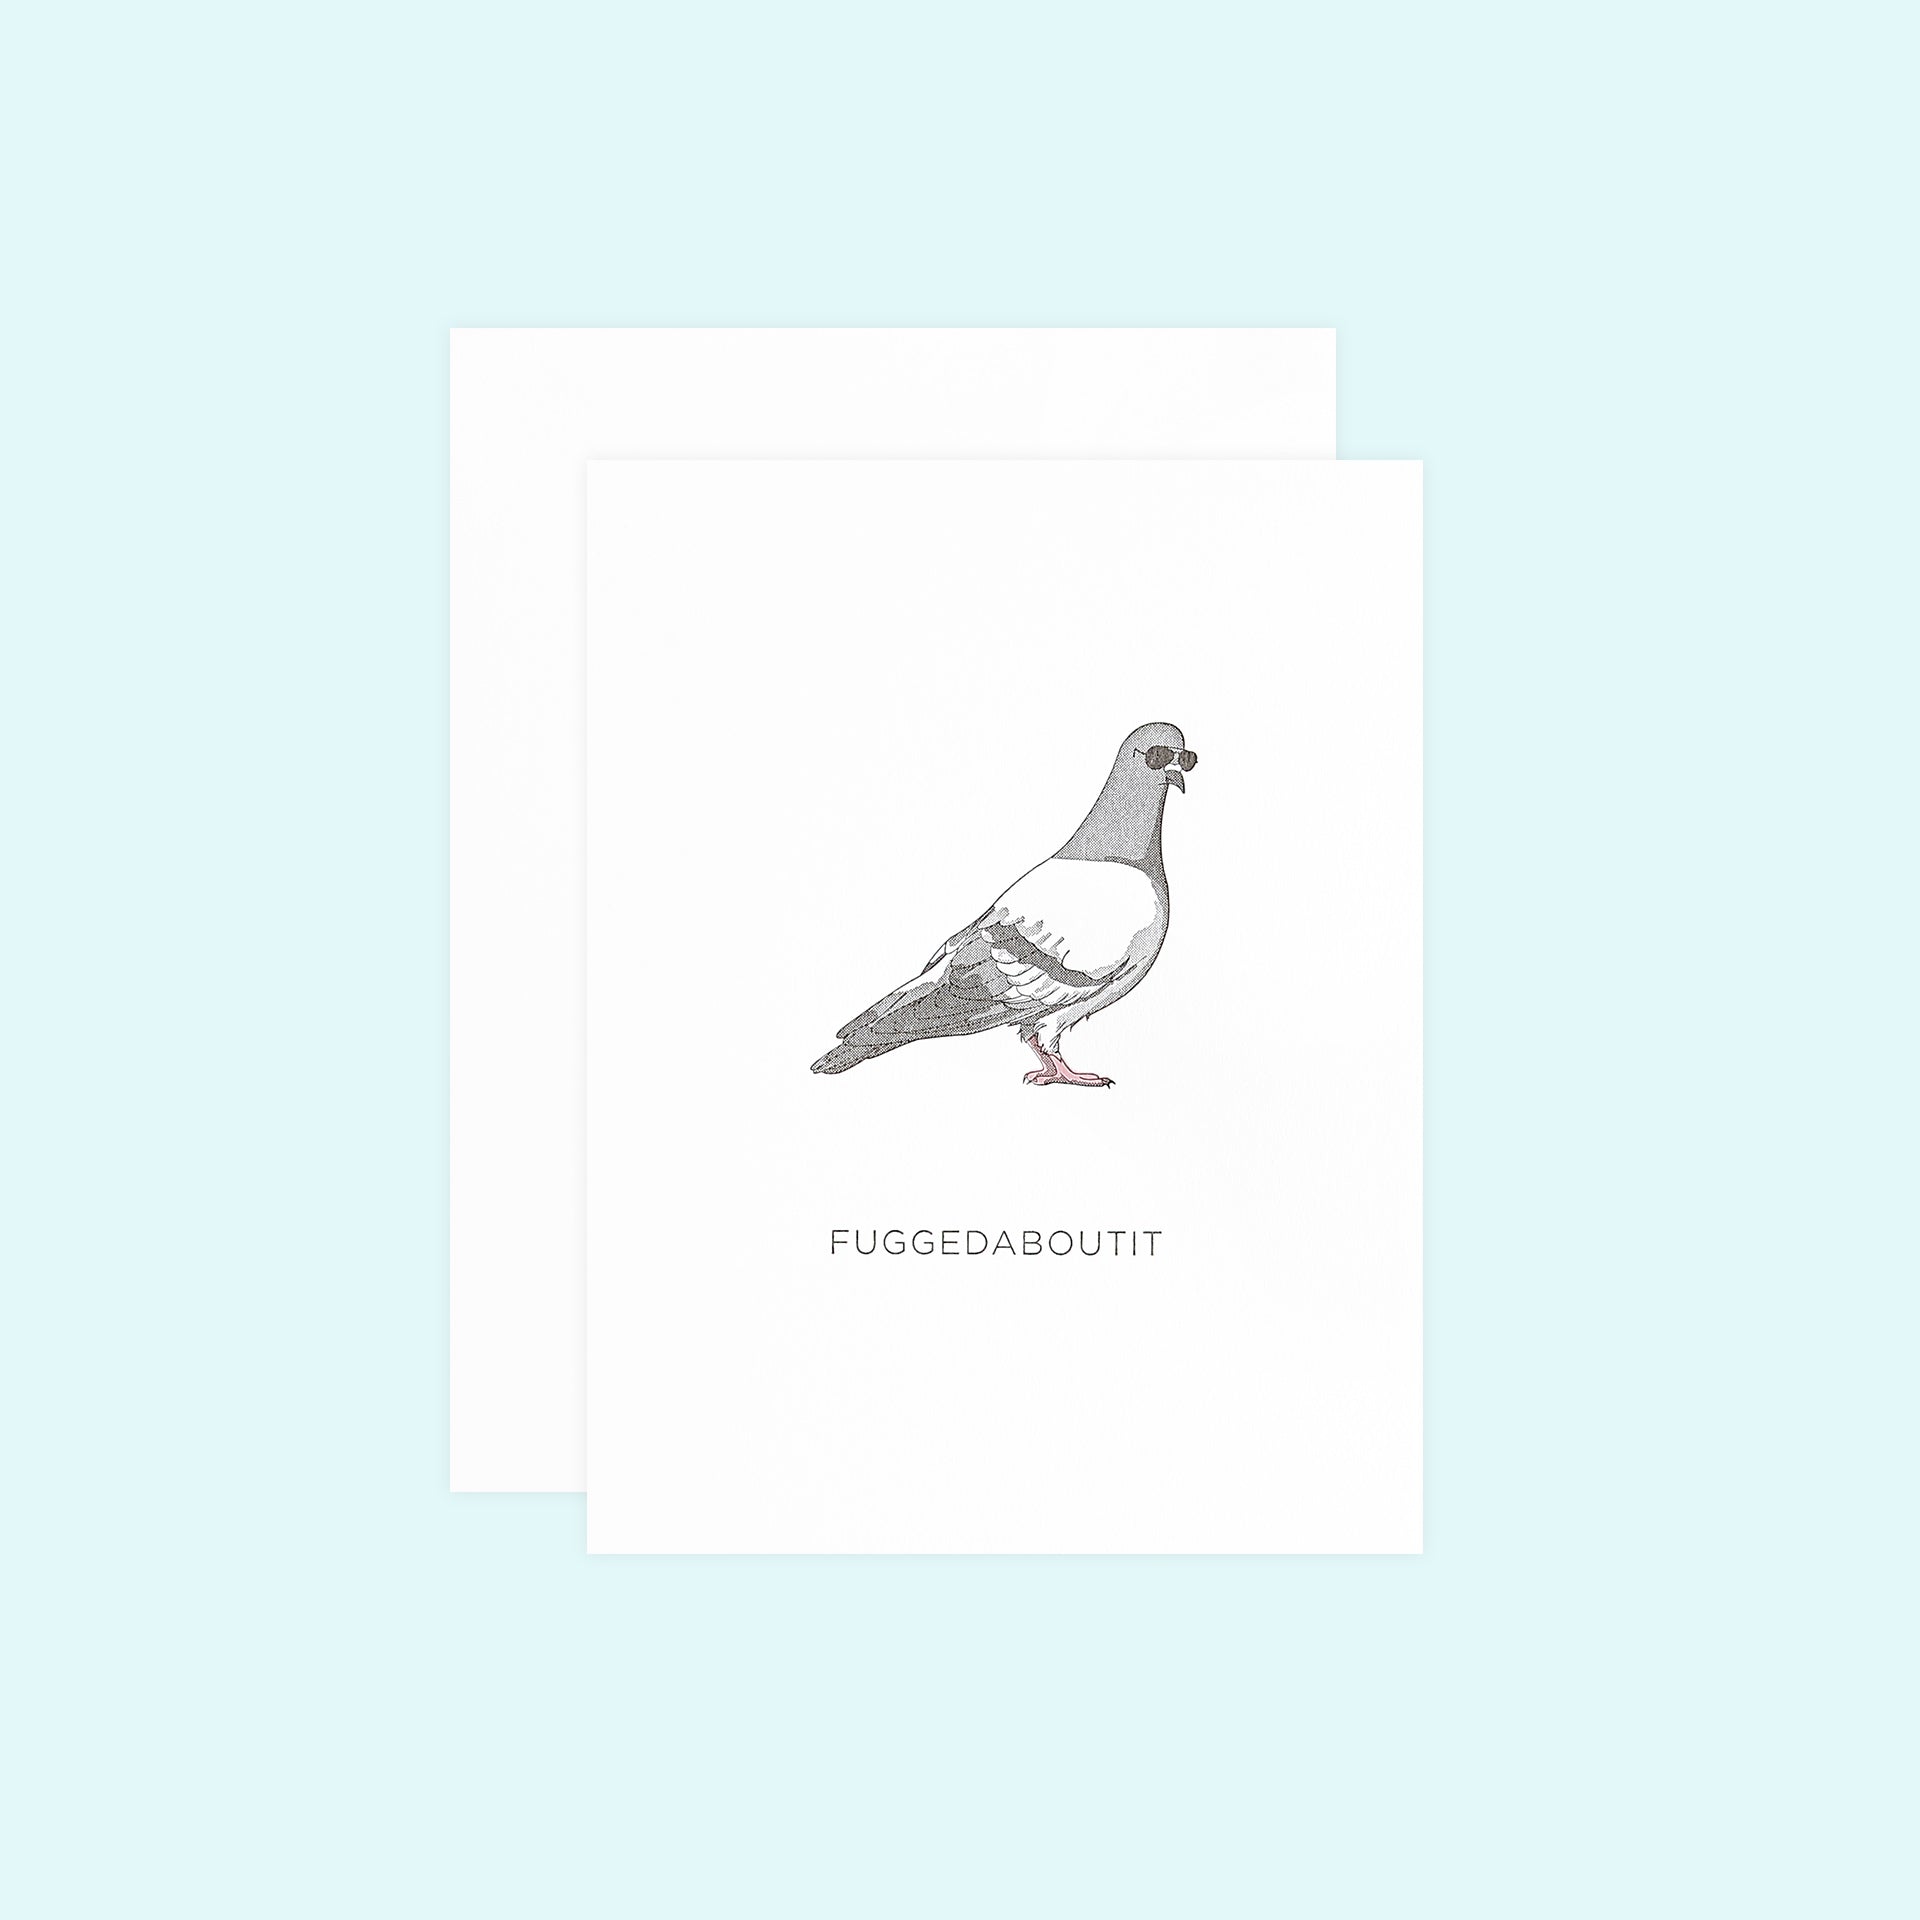 Quick Brown Fox Letterpress Pigeon Fuggedaboutit Greeting Card 